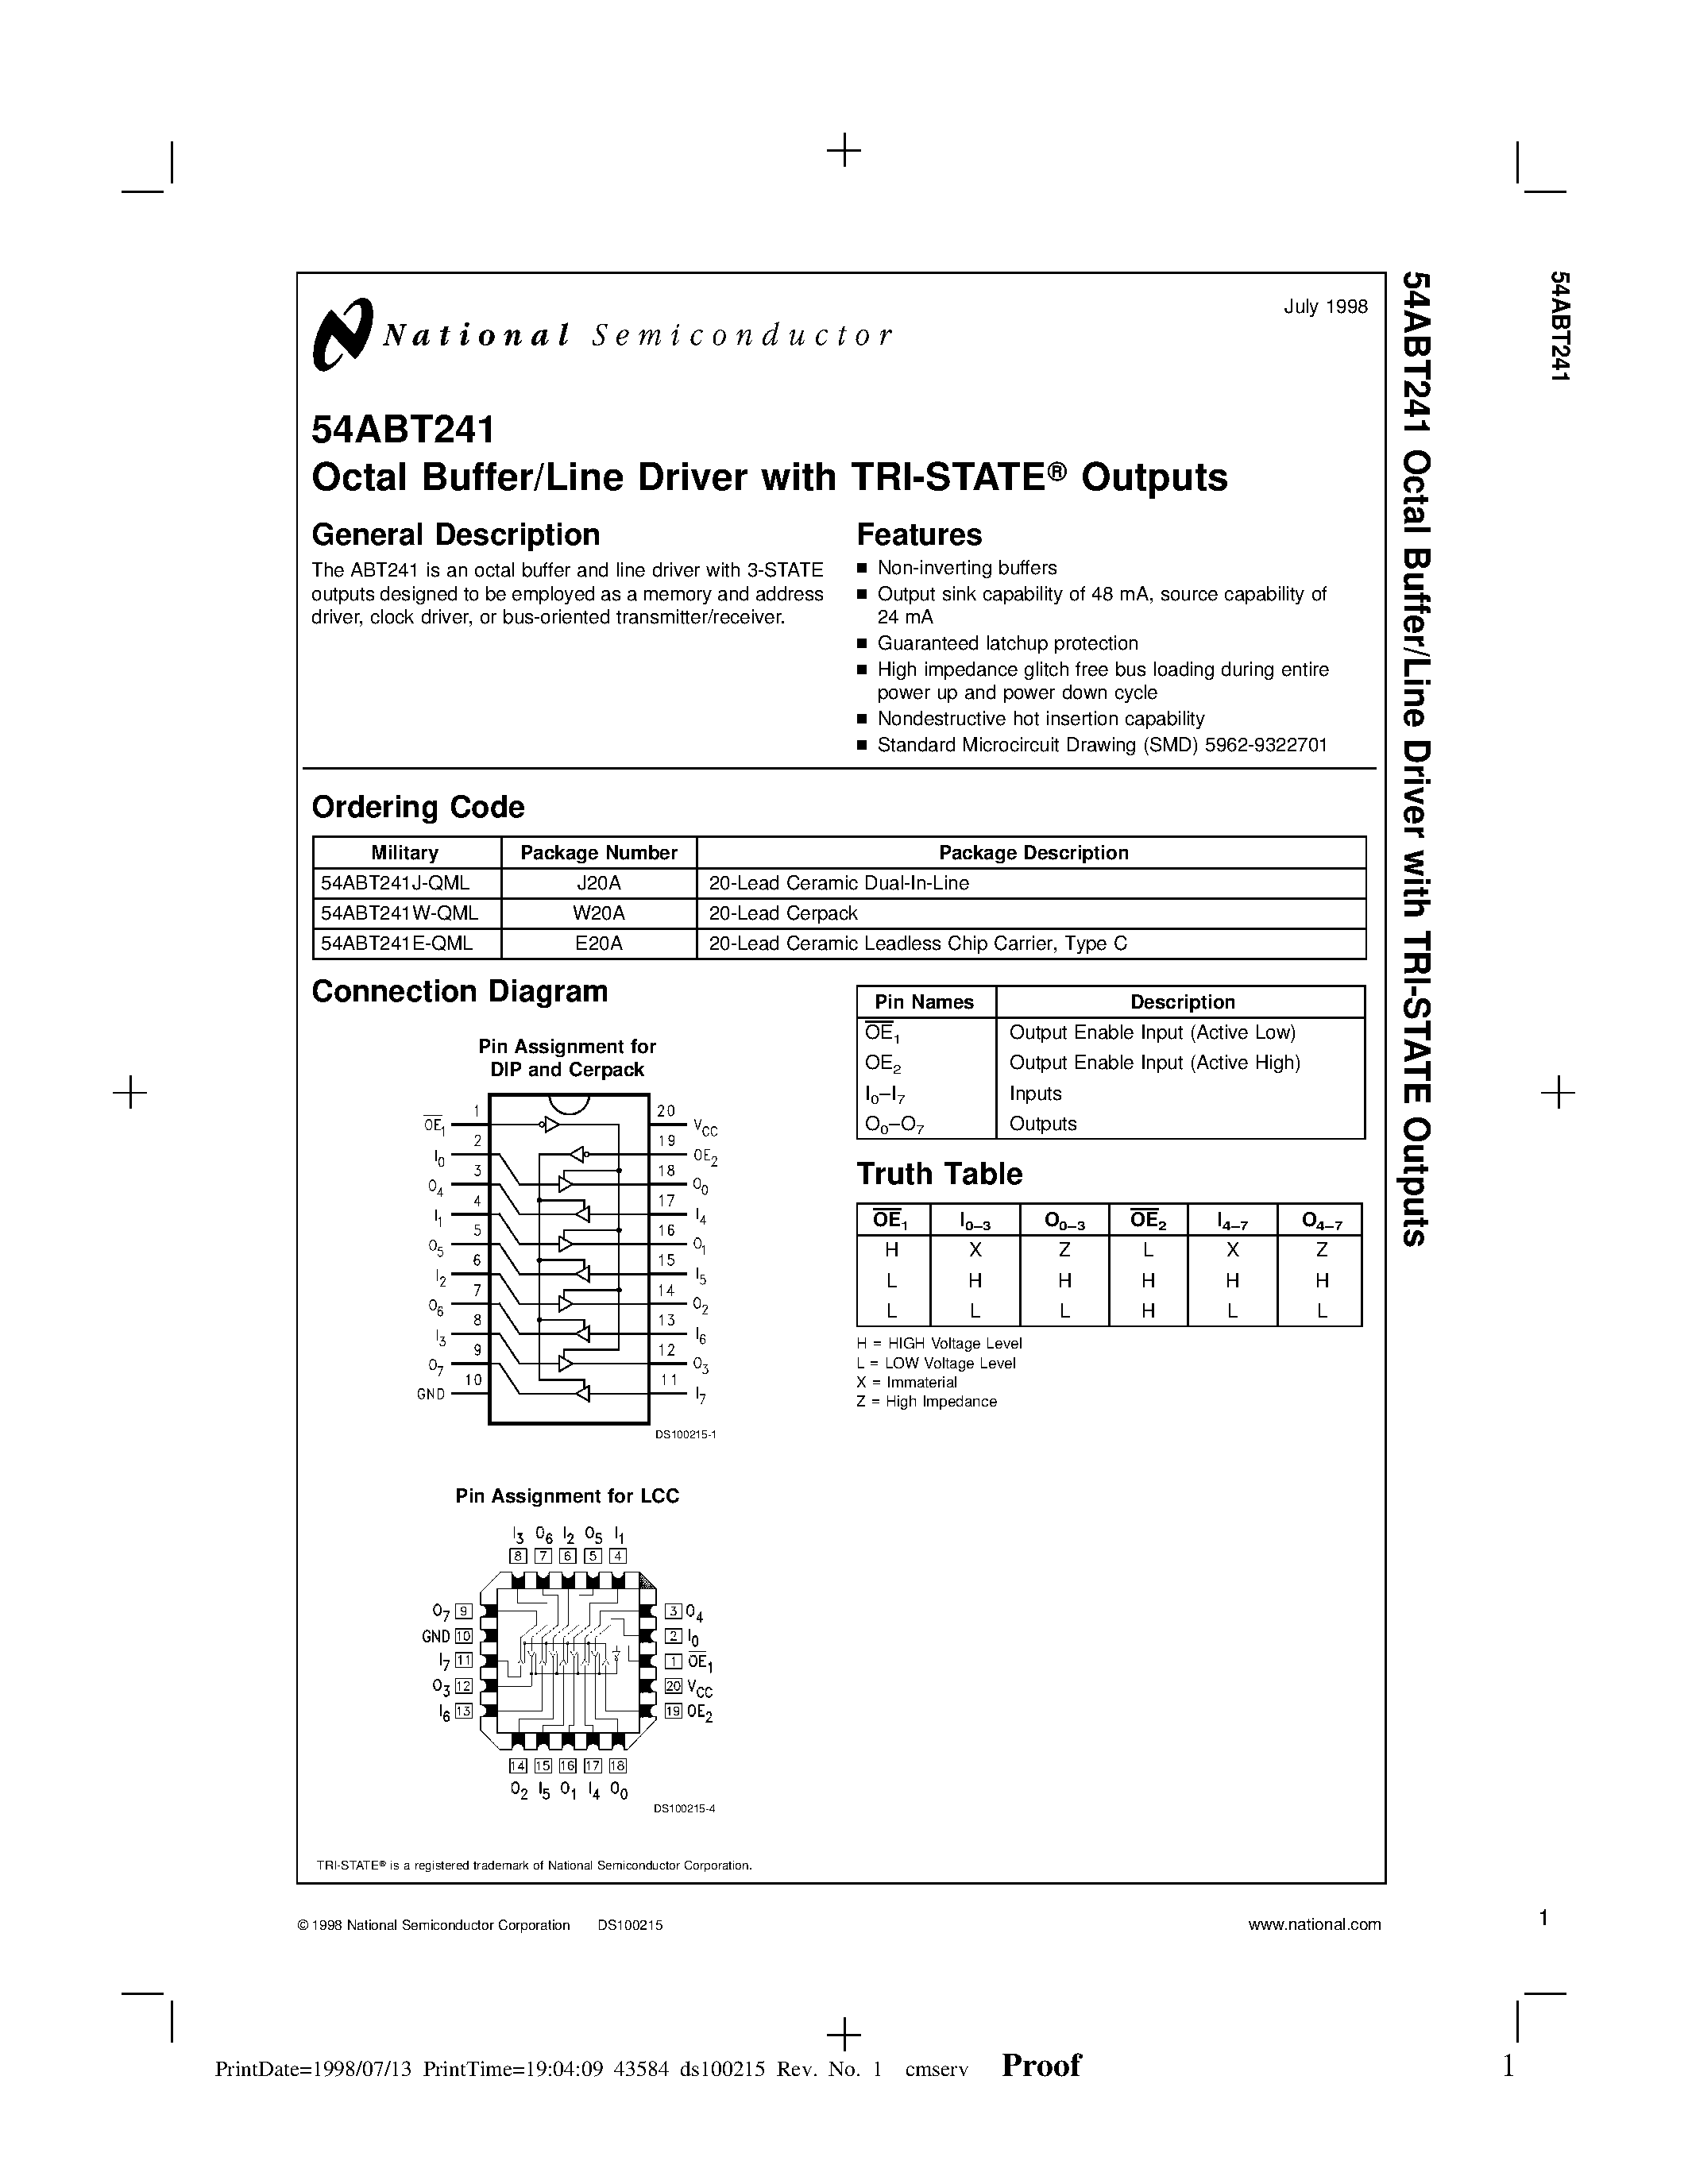 Datasheet 54ABT241E-QML - Octal Buffer/Line Driver with TRI-STATE Outputs page 1